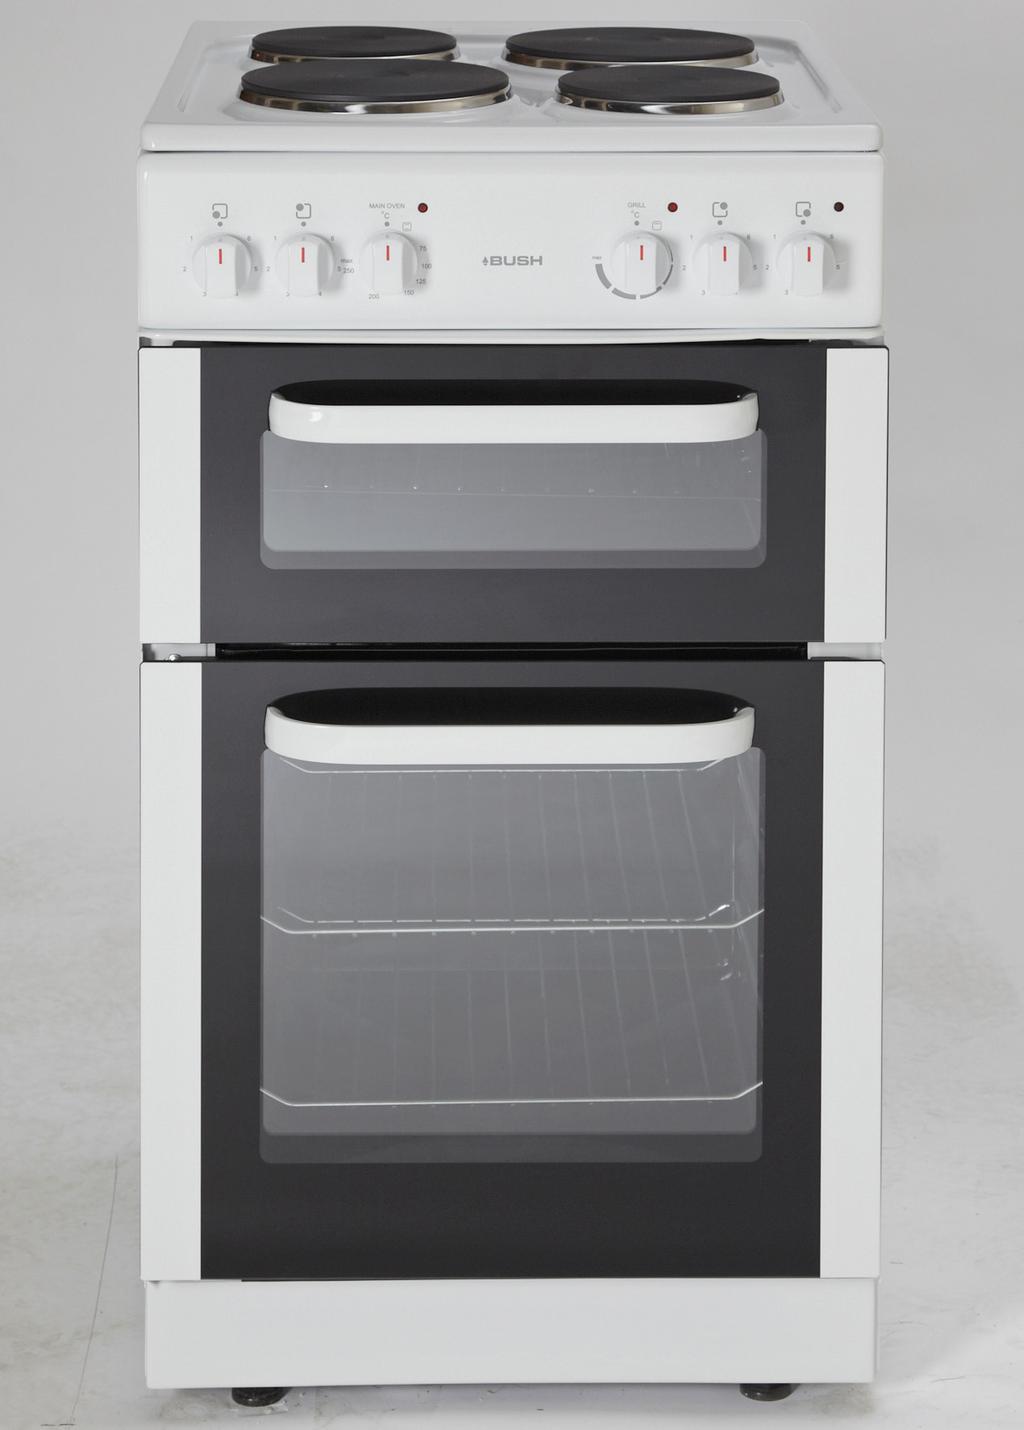 Electric Cooker Installation & User Instructions - Please keep for future reference Cat no Model 2679556 BUSH BET50W WHITE 2441935 BUSH BET50B BLACK 3596669 BUSH BET50S SILVER Cooker serial number